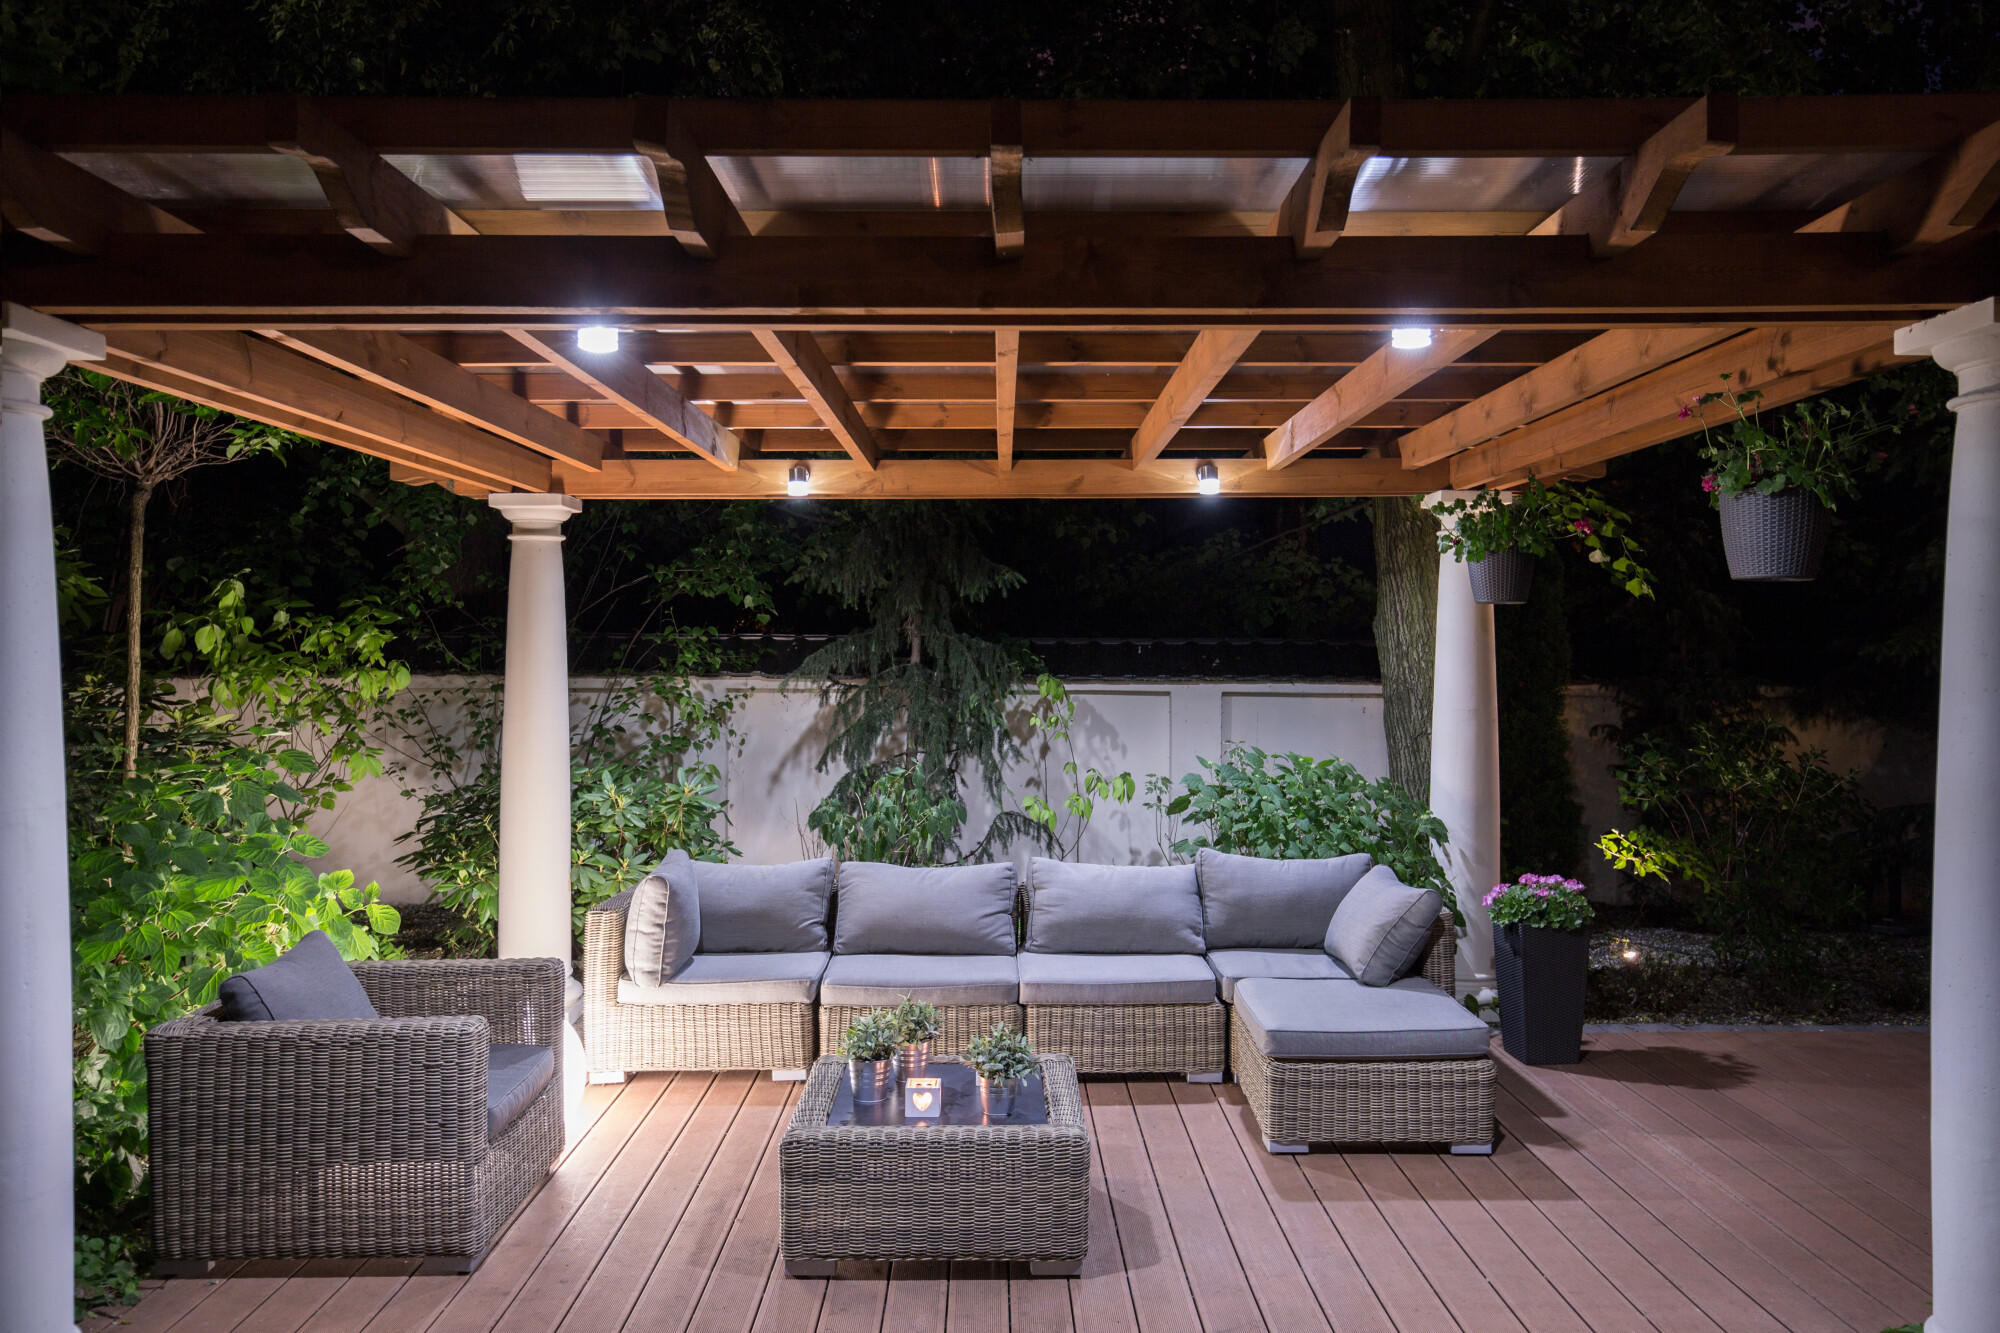 Patios are the perfect opportunity to let your creativity run wild. Get inspired by these six patio remodeling ideas for entertaining, relaxing, and more.